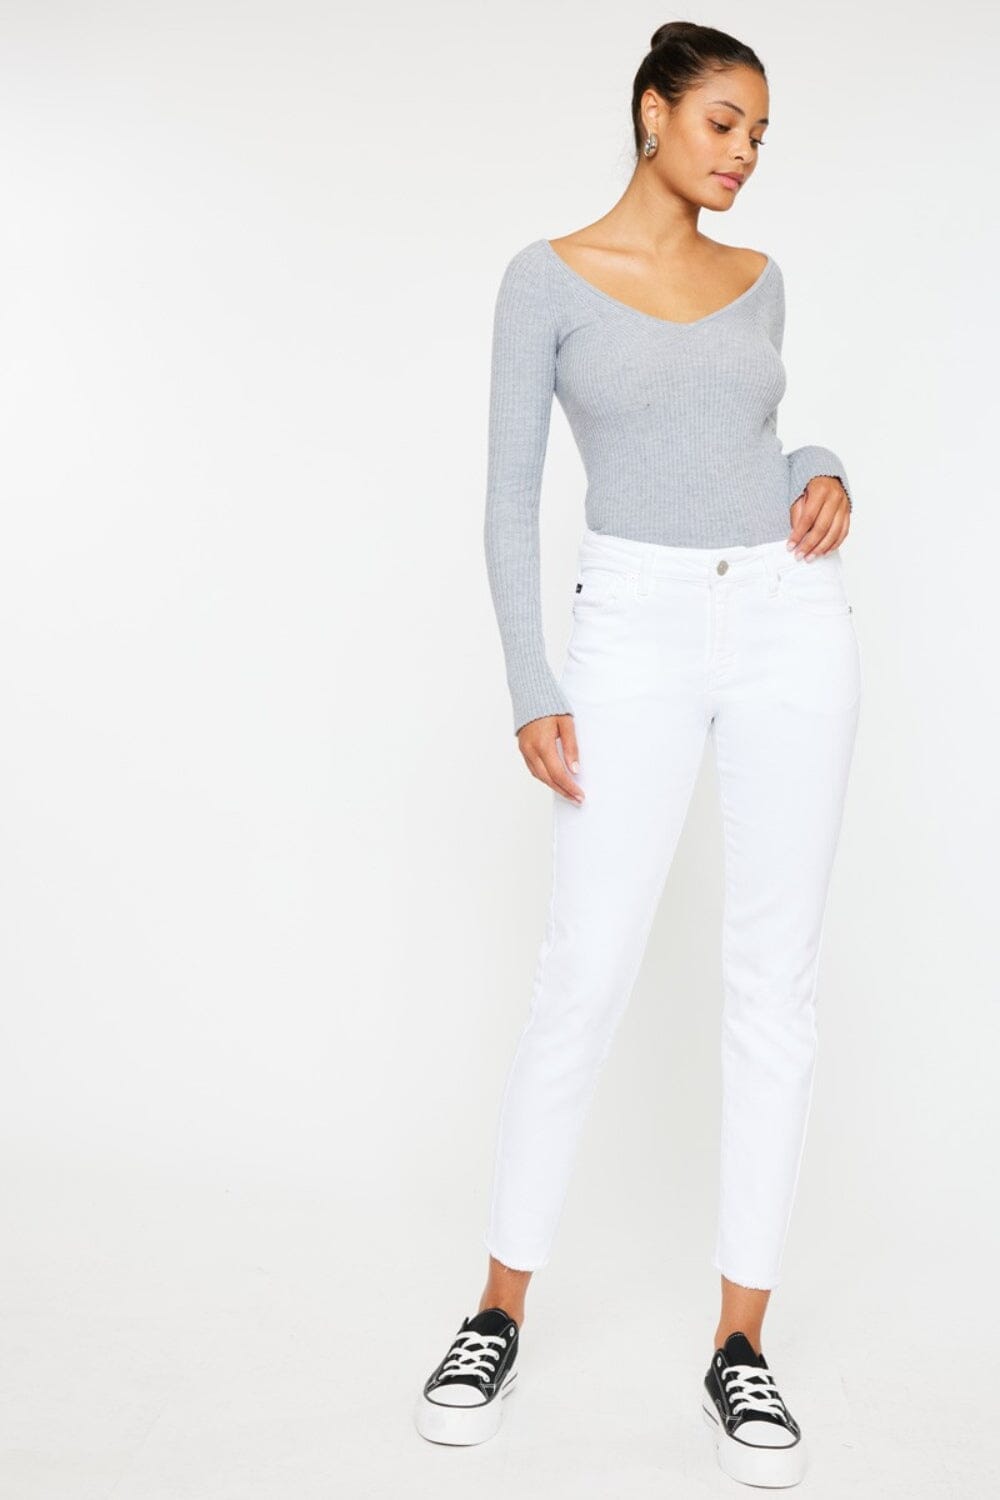 Kancan White Mid Rise Ankle Skinny Jeans jeans jehouze 